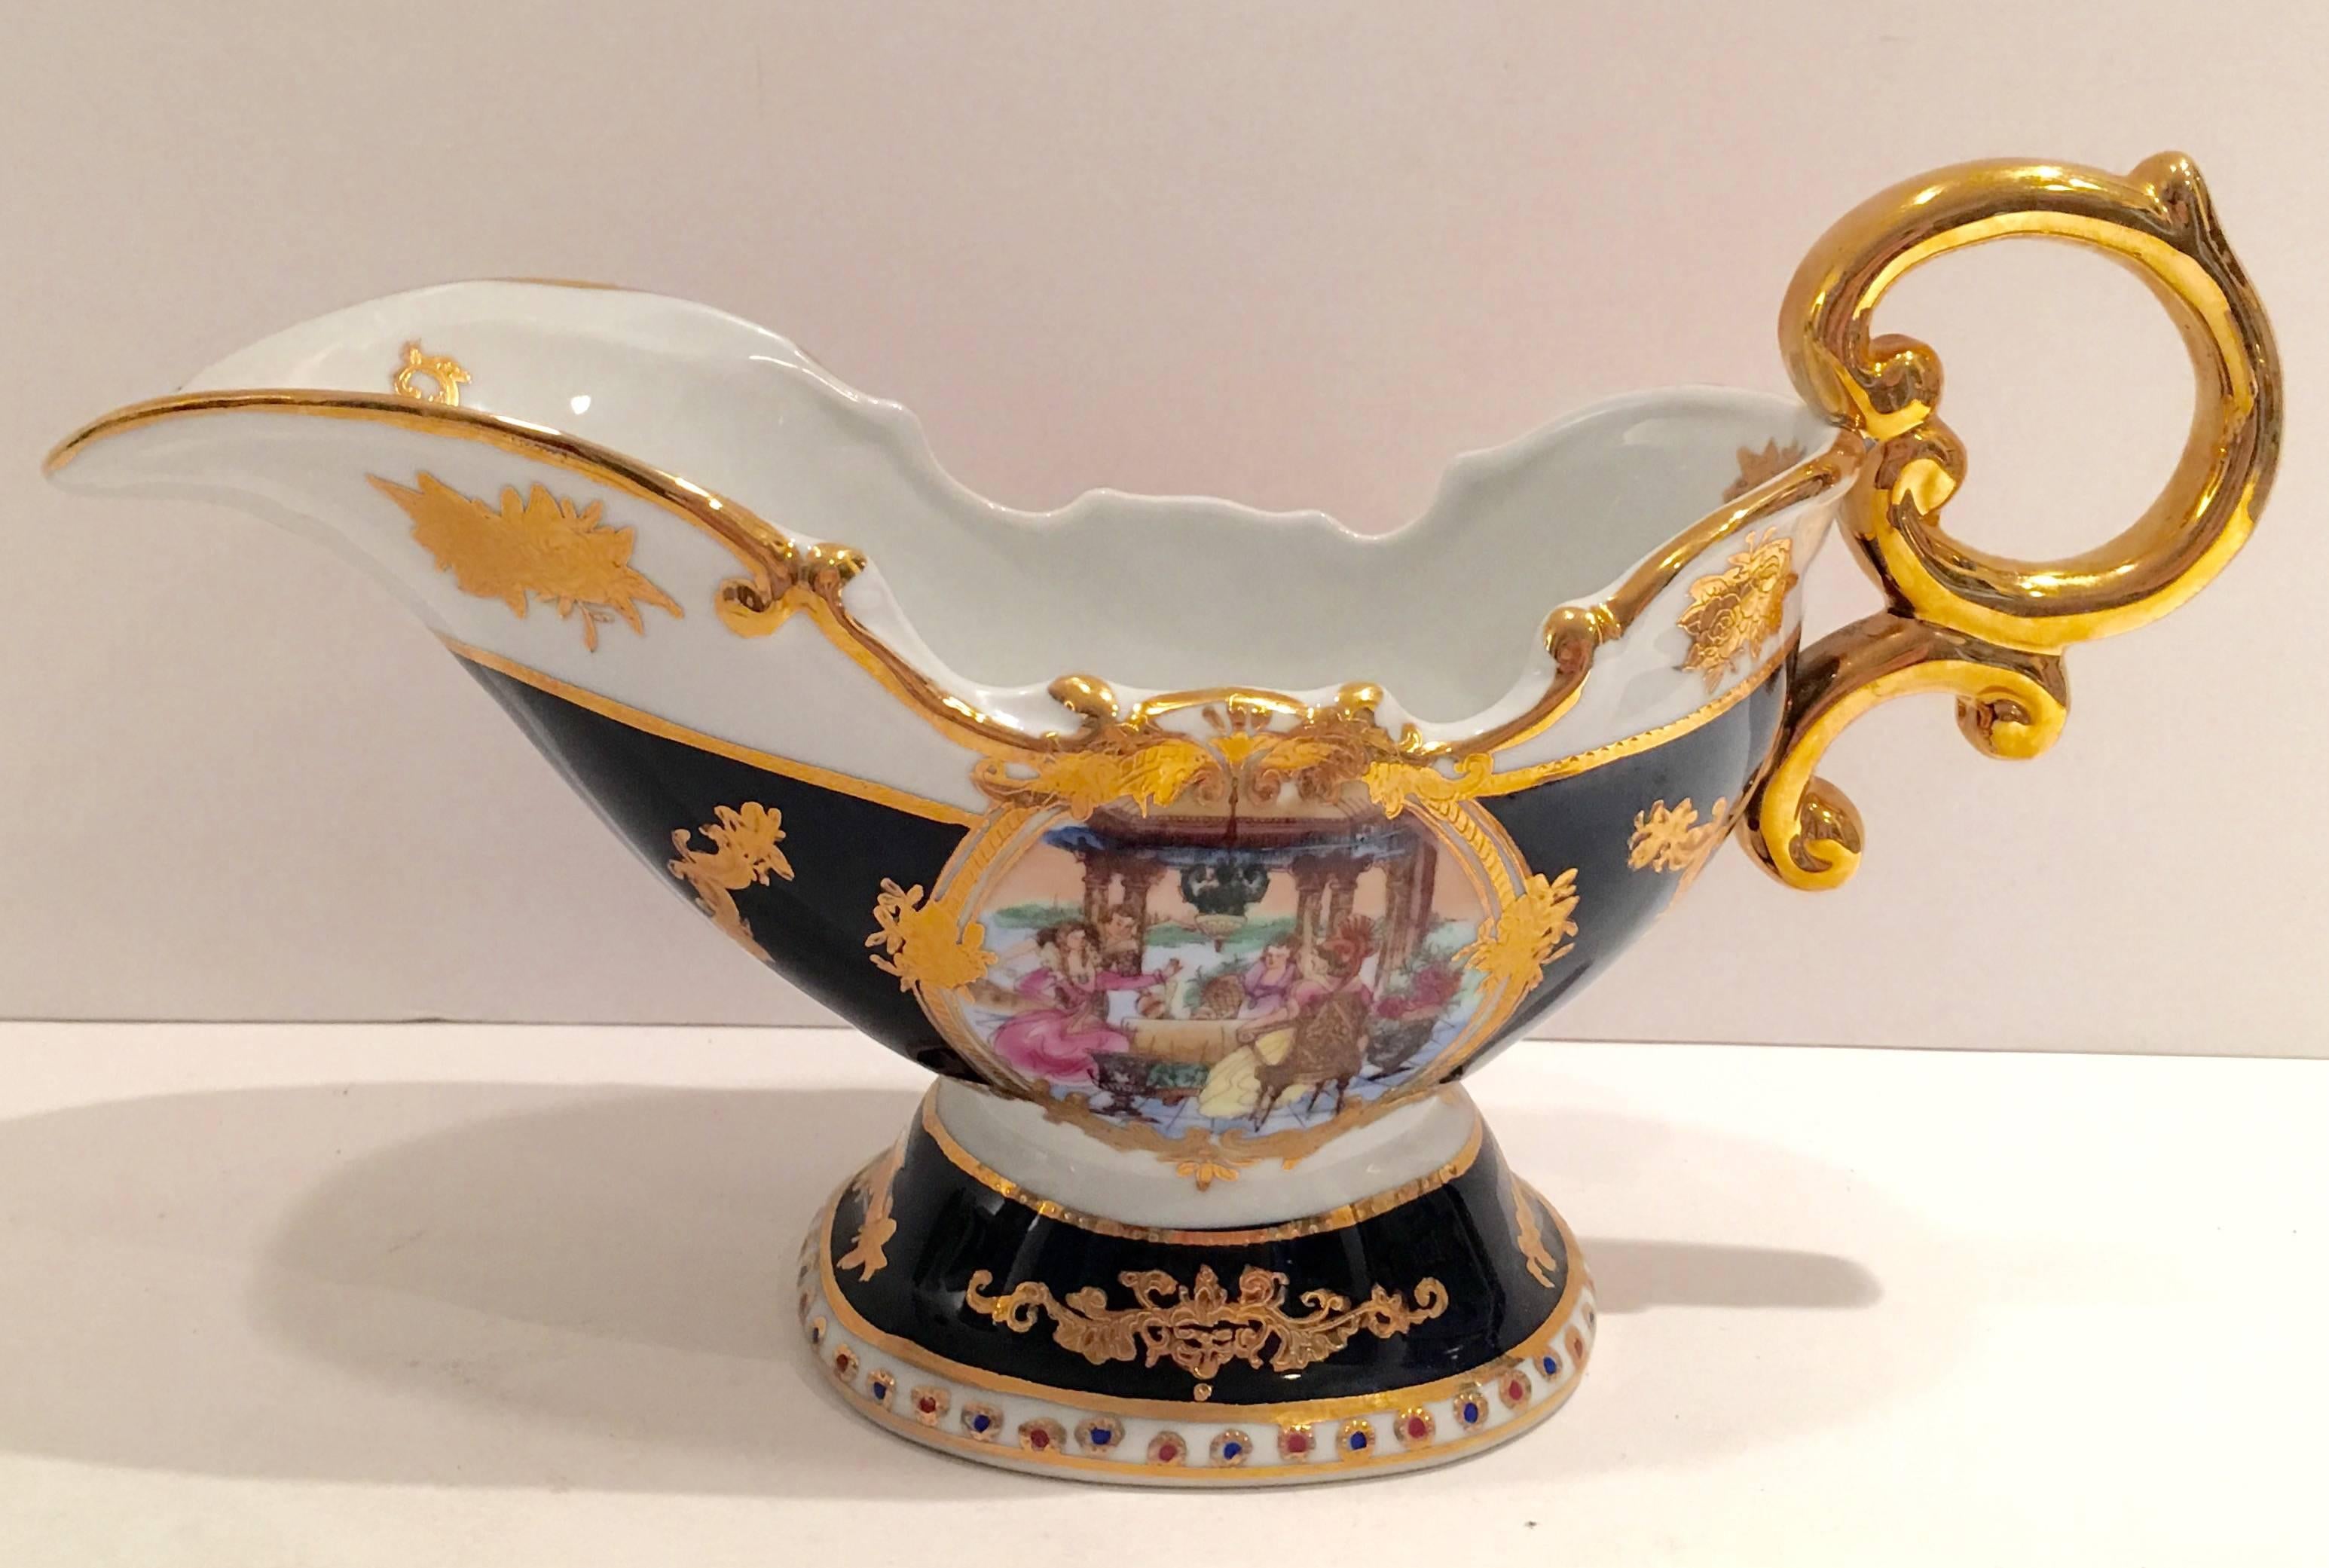 French Sevres style monumental porcelain hand-painted cobalt with 22-karat gold decoration gravy boat. Features a double sided hand painted central 18th century group dining Al Fresco. Signed on the underside, L.F. Fine Porcelain Limoges-P.R.C.
  